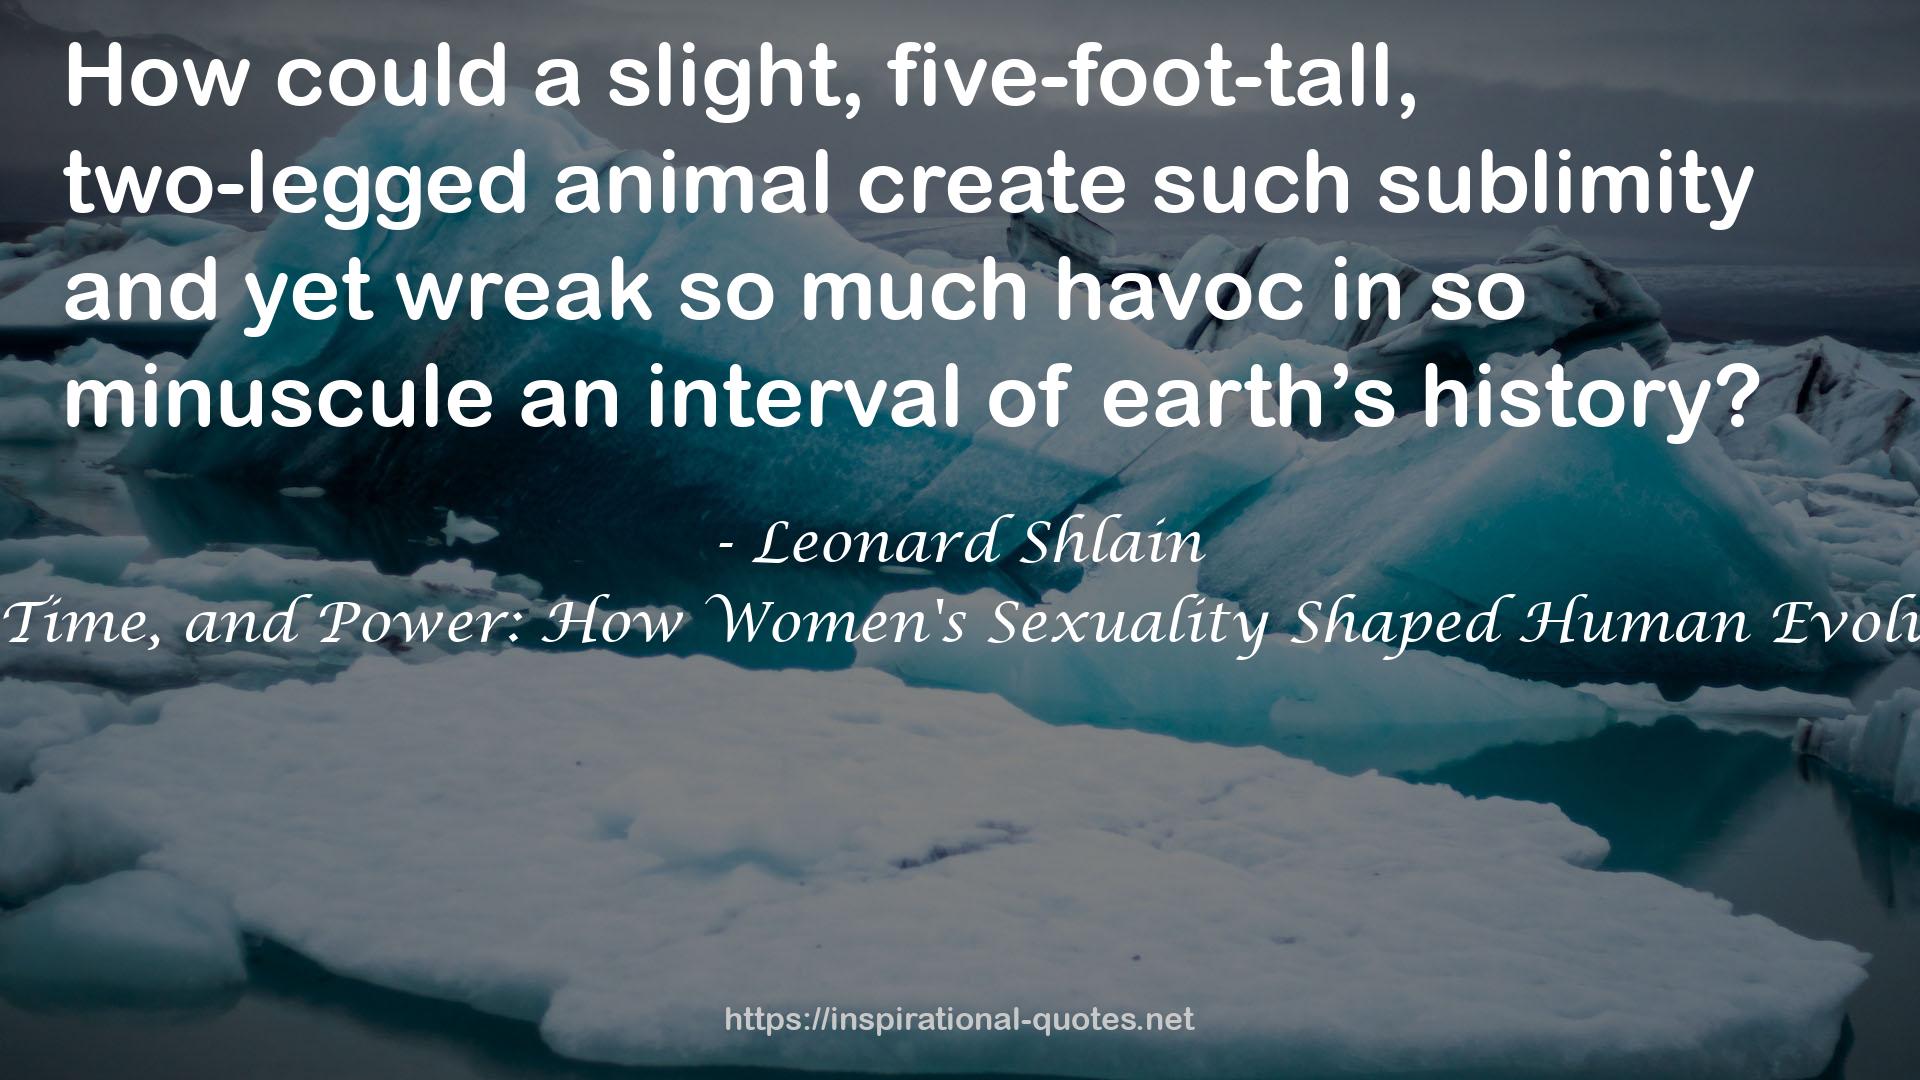 Sex, Time, and Power: How Women's Sexuality Shaped Human Evolution QUOTES